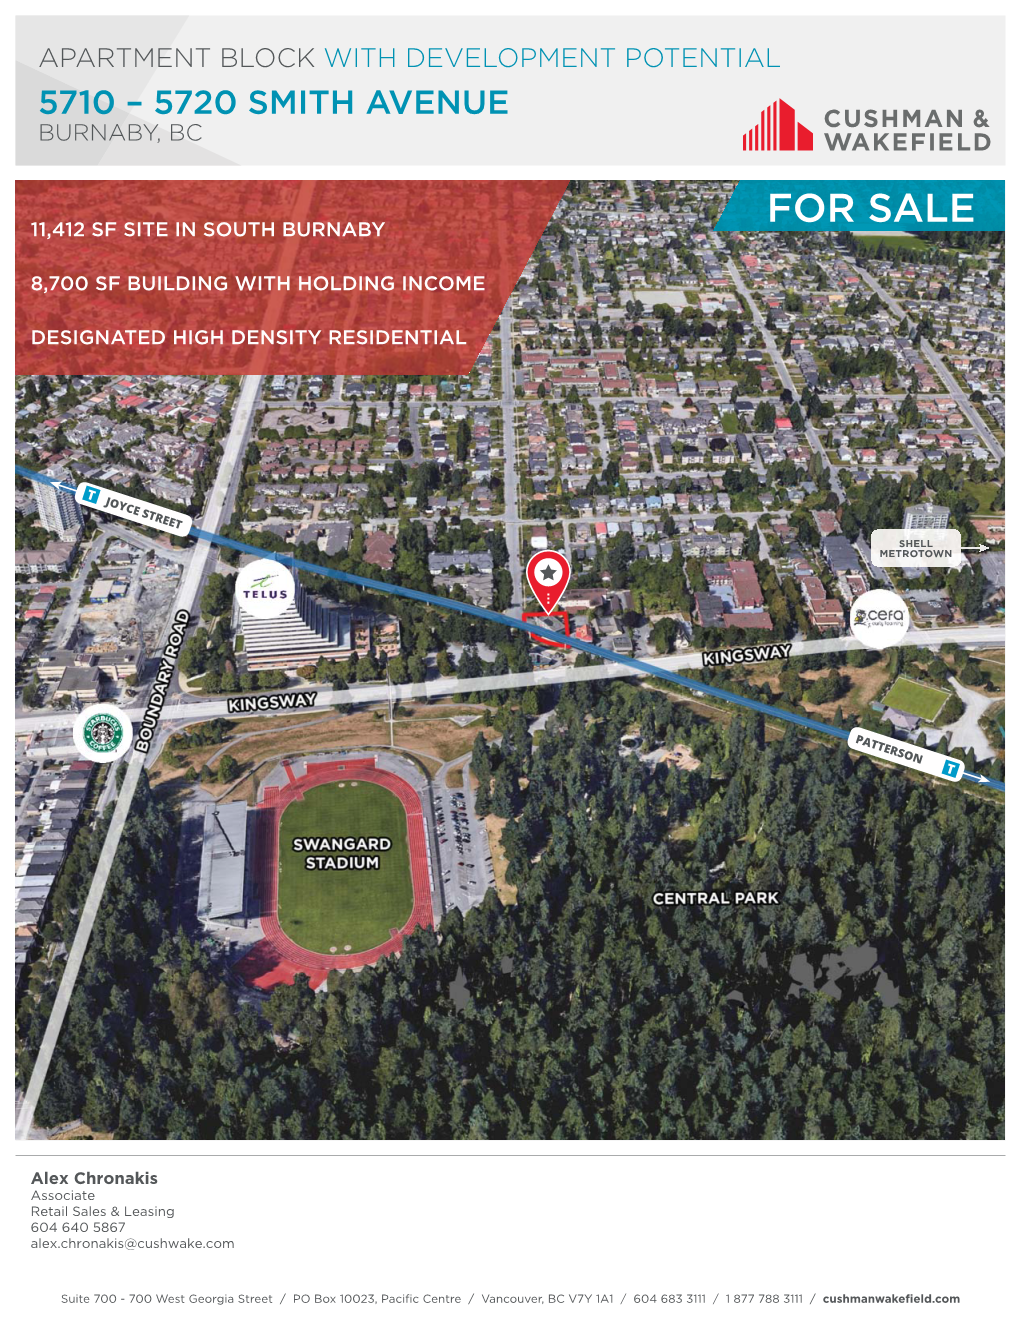 For Sale 11,412 Sf Site in South Burnaby